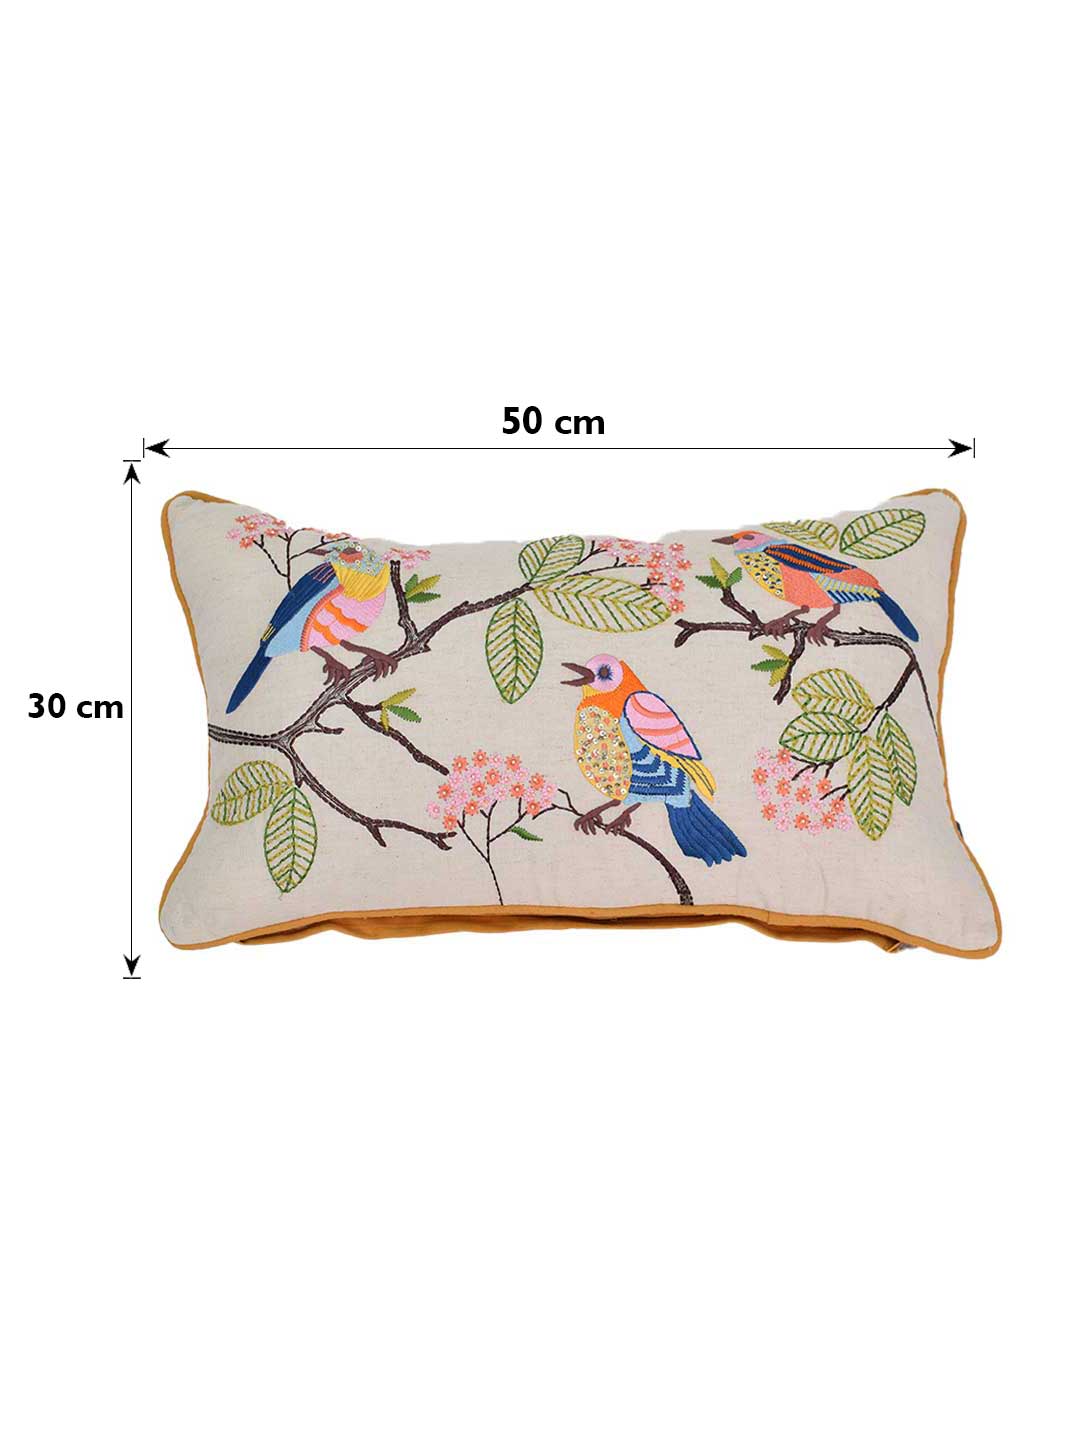 Blanc9 Sweety in the garden Cushion Cover with Filler 30x50cm